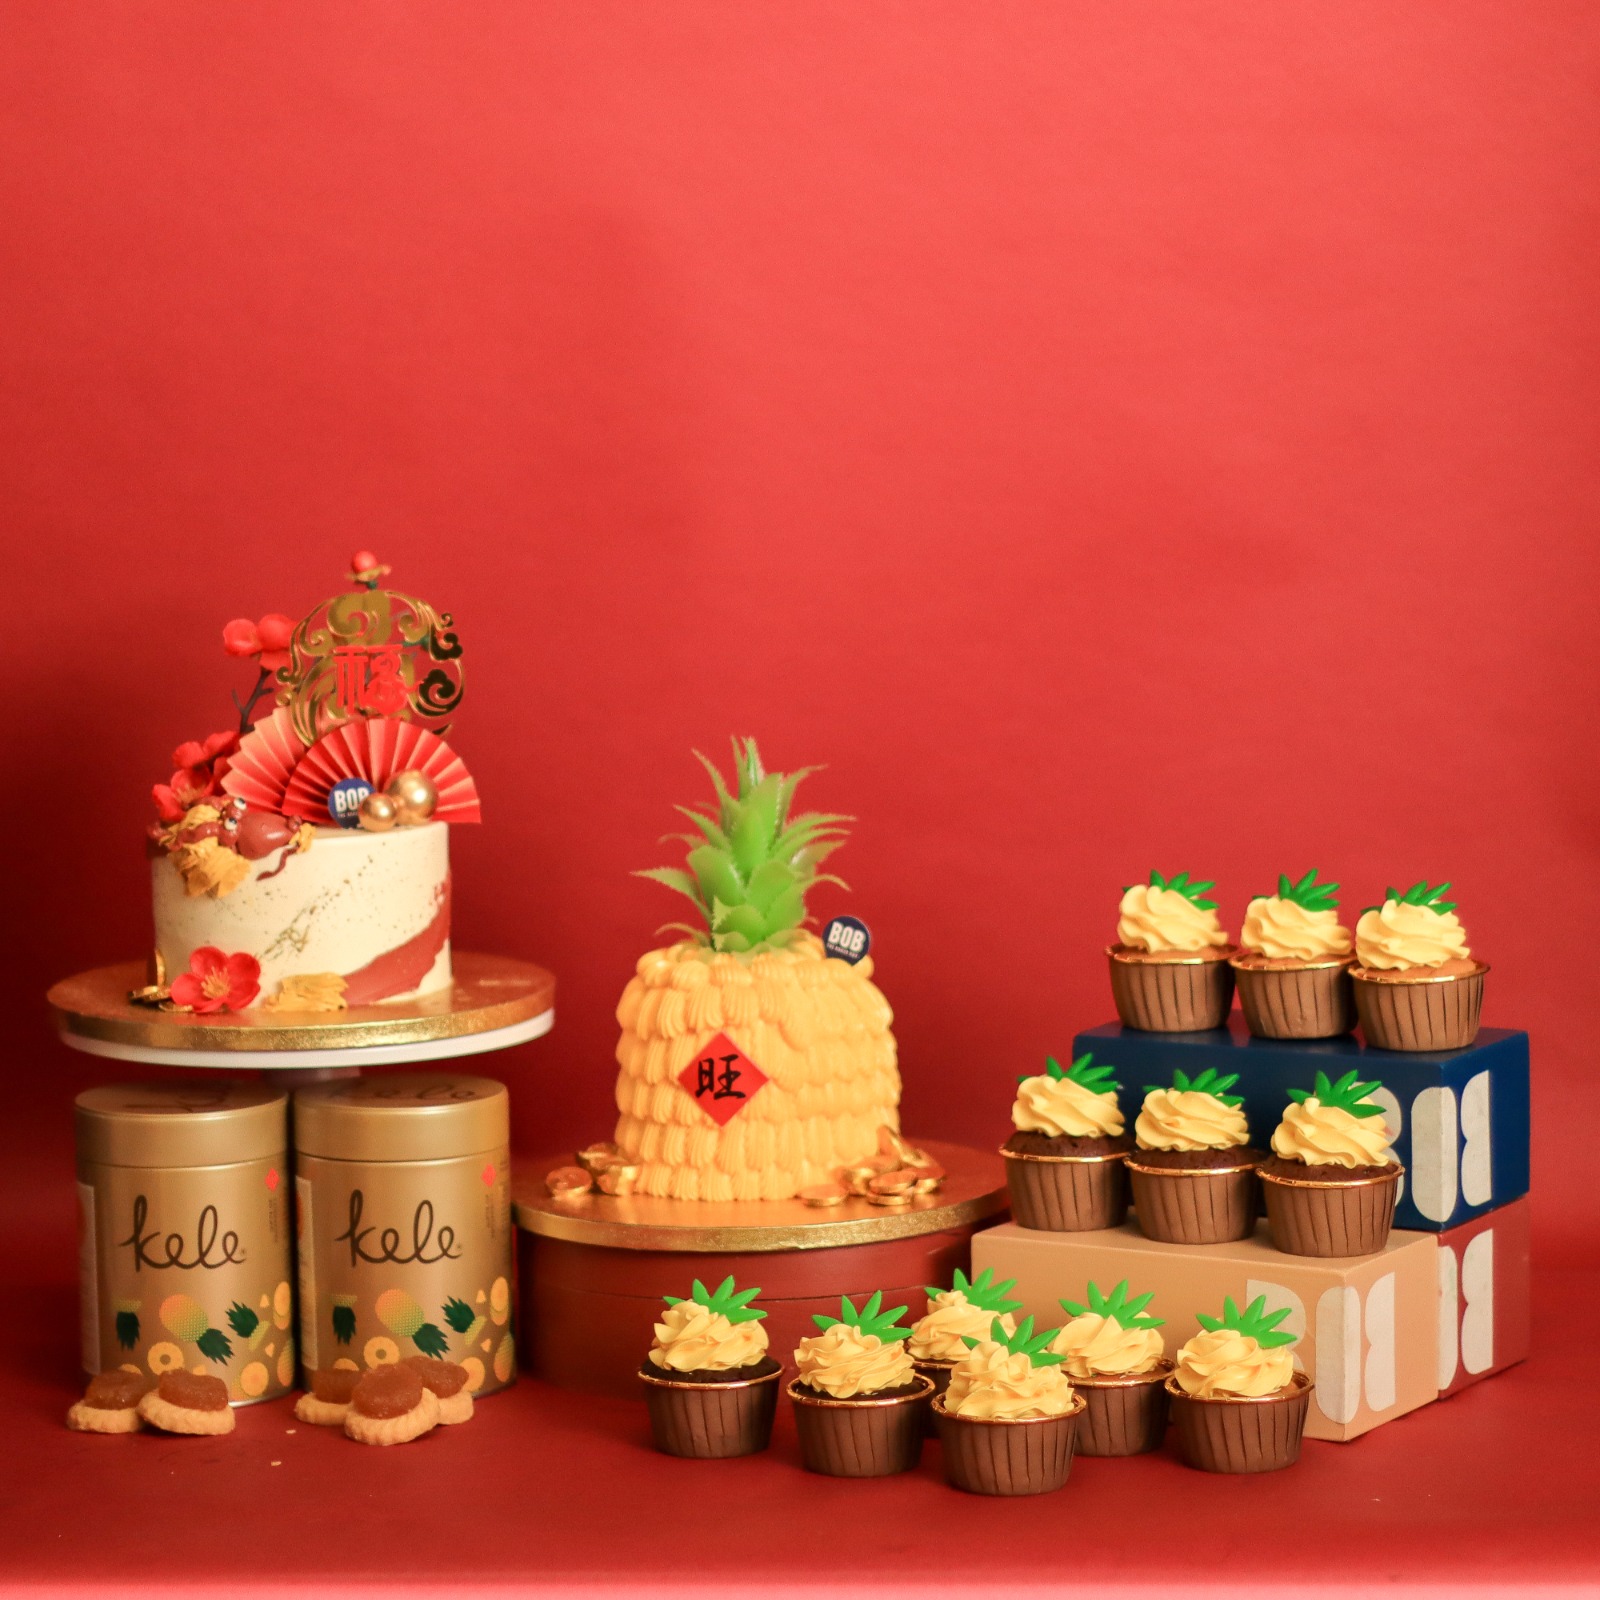 Bundle 5: Chinese New Year HUAT Platter  (Consisting of 3D Golden Pineapple Brownie, Year of Dragon Cake, 1 dozen Pineapple Cupcakes, 2 x Kele Pineapple Tarts)